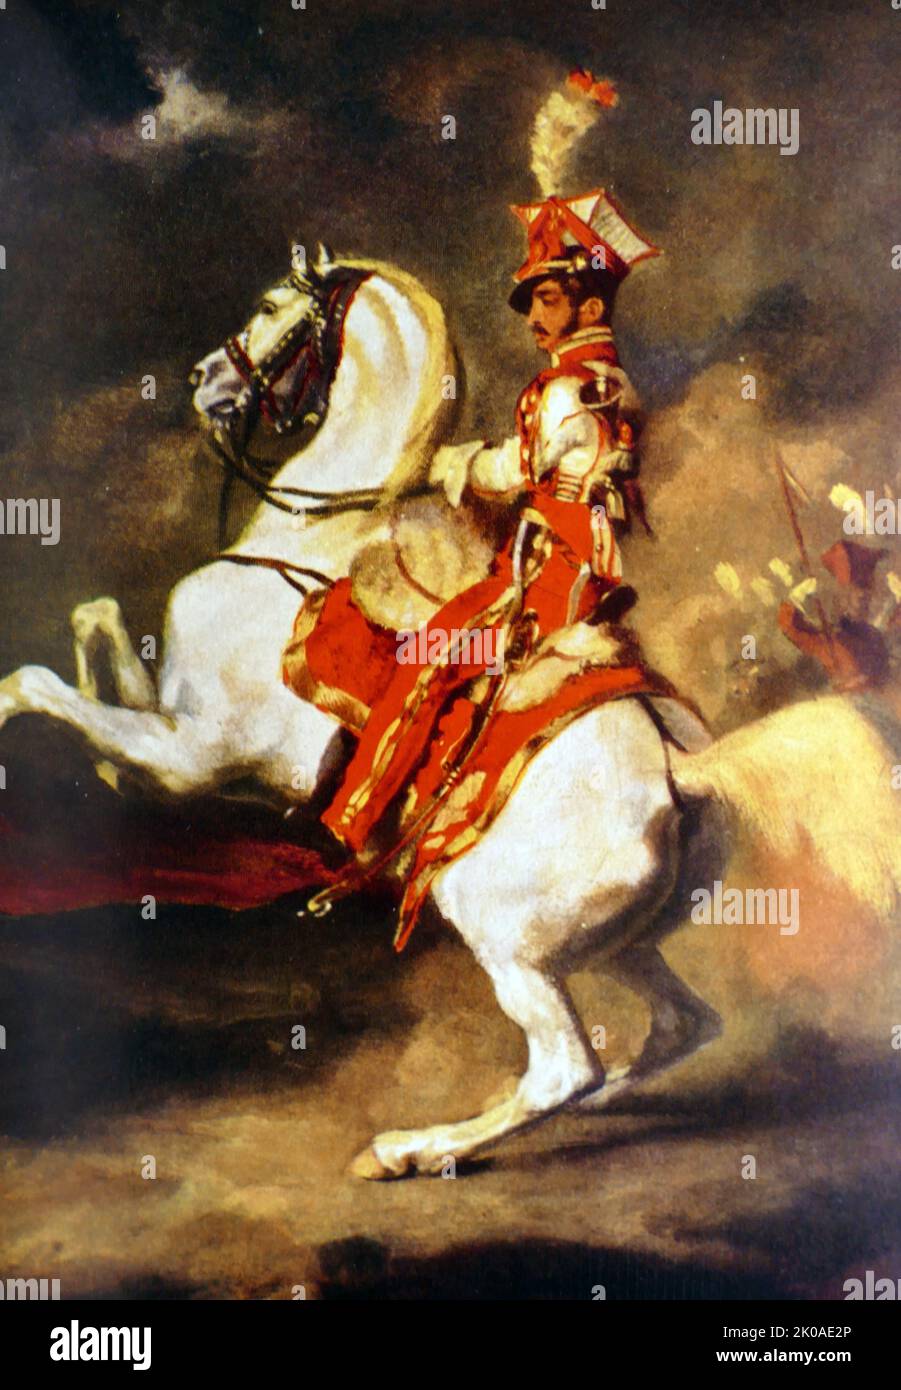 Polish Trumpeter 1813-14, by Jean Louis Andre Theodore Gericault. French, 1791-1824 Stock Photo